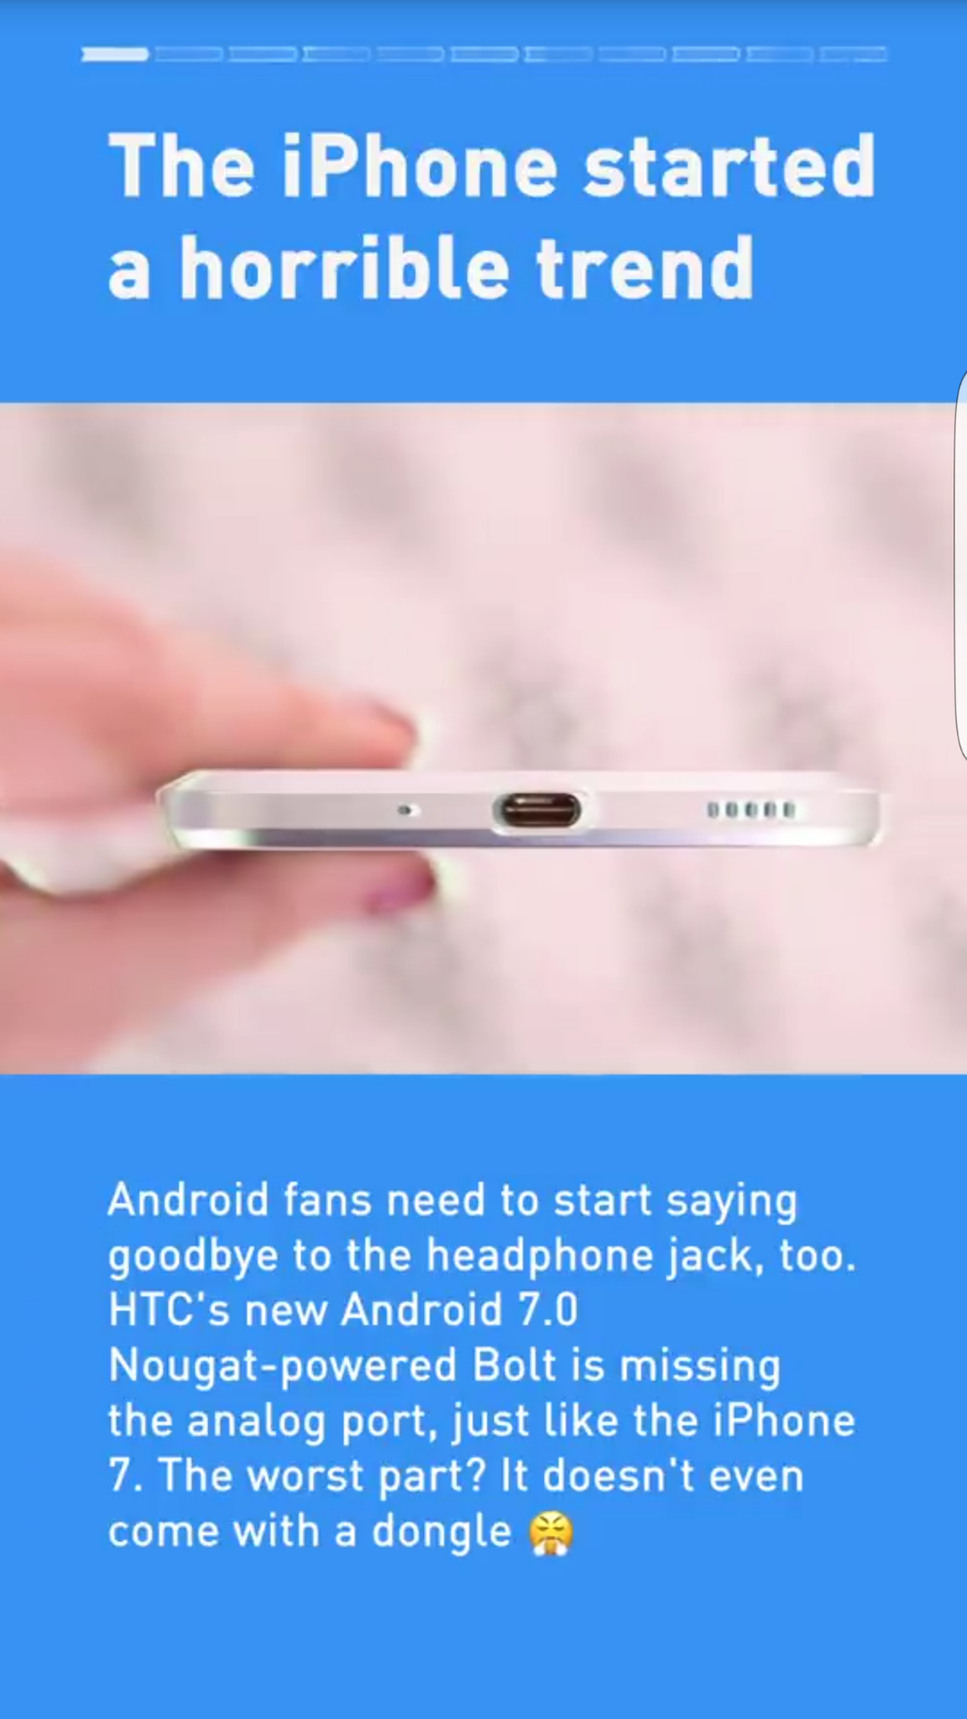 Oh God it's coming to Android now. Time to boycott HTC - meme